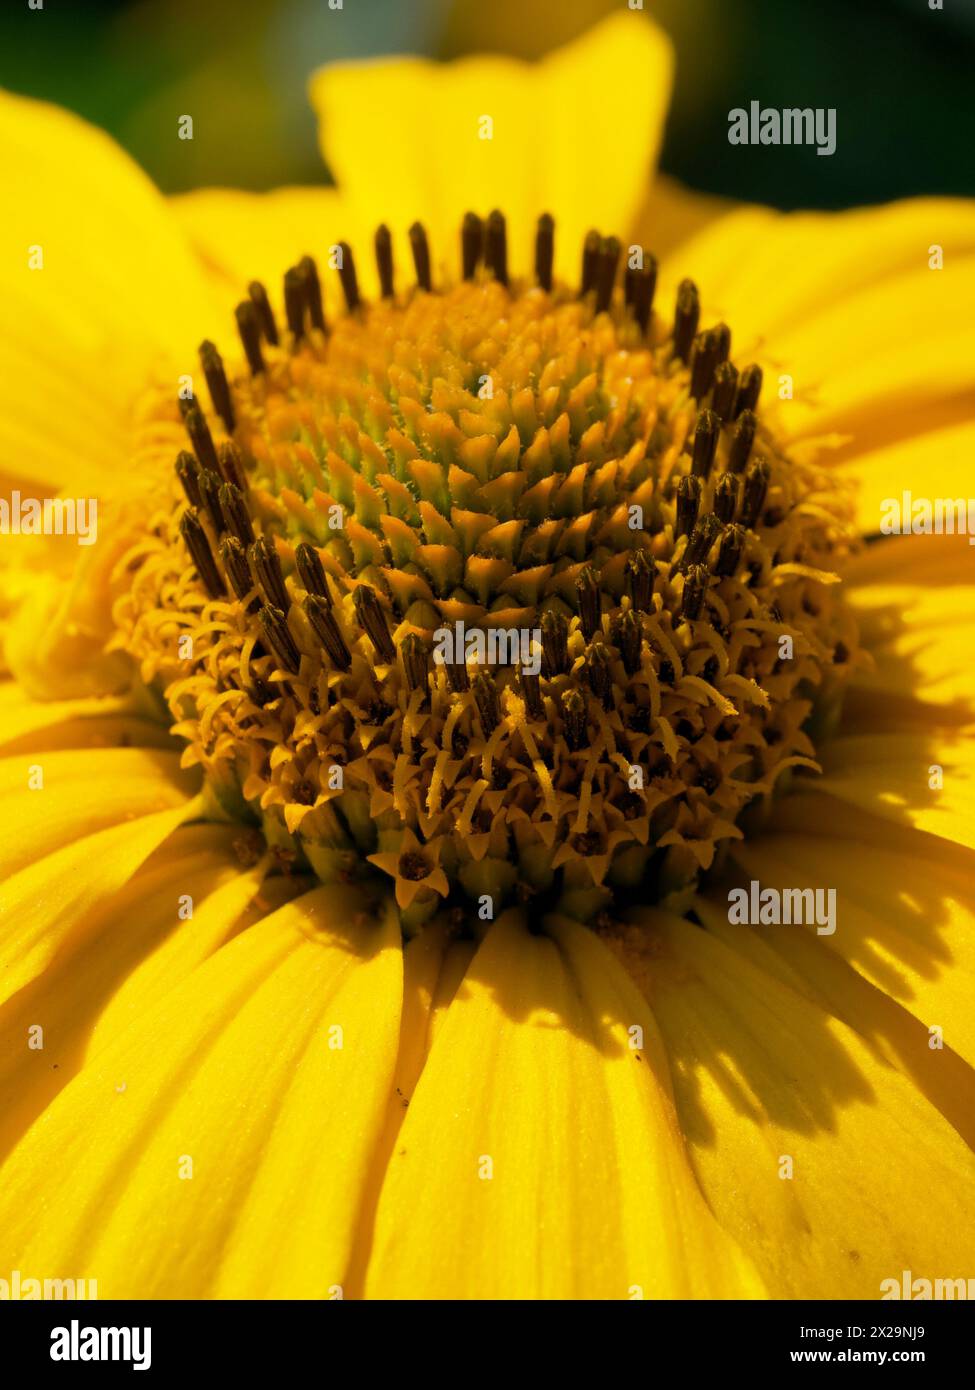 A sunlit yellow flower displays its intricate core and smooth, radiant petals. Stock Photo